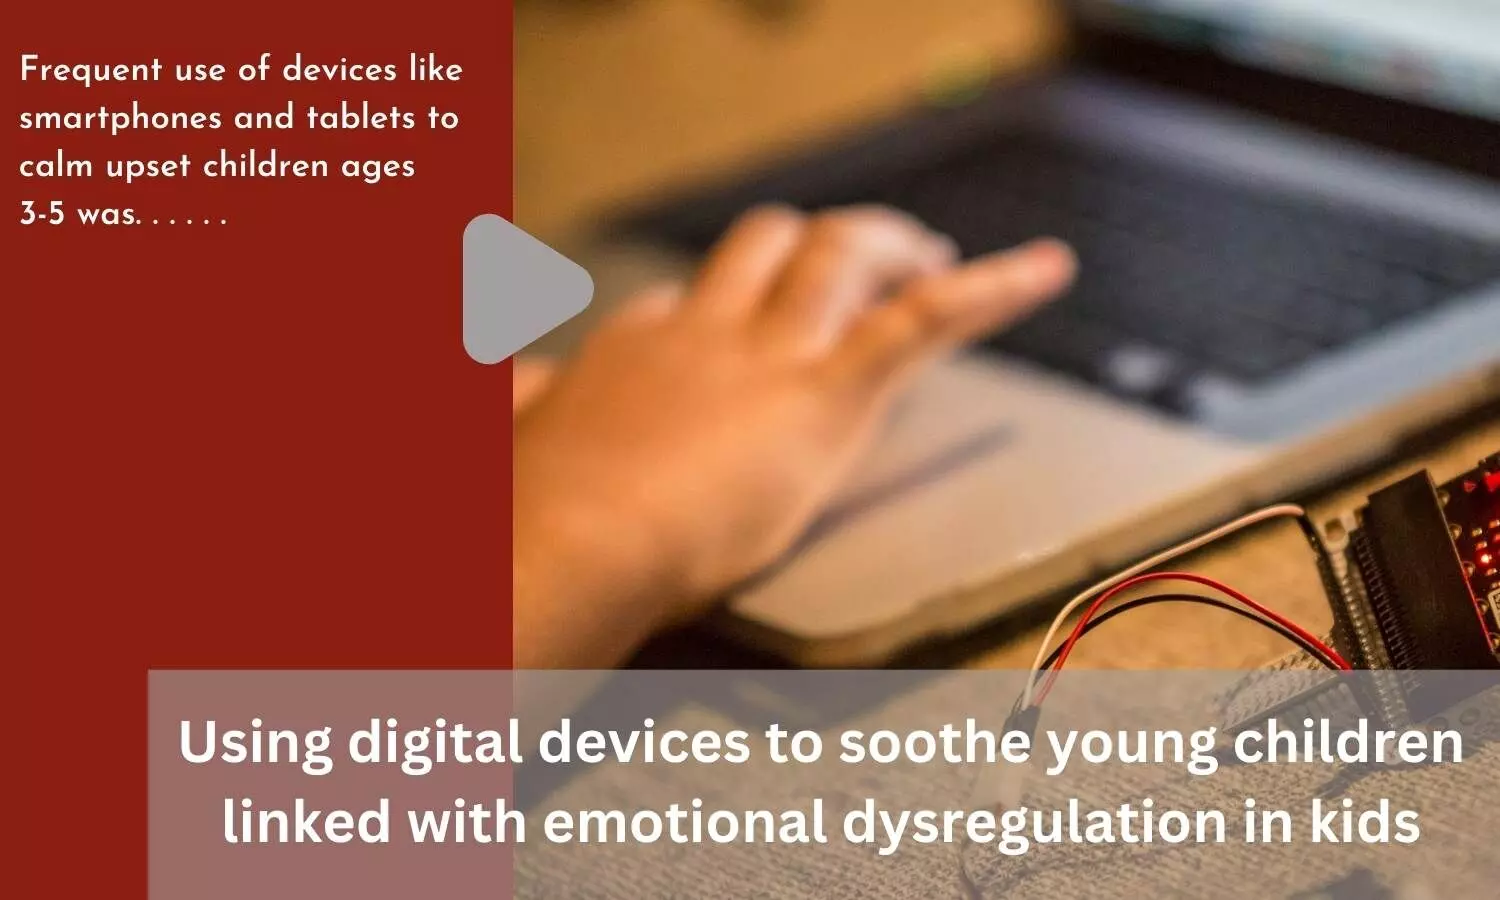 Using digital devices to soothe young children linked with emotional dysregulation in kids